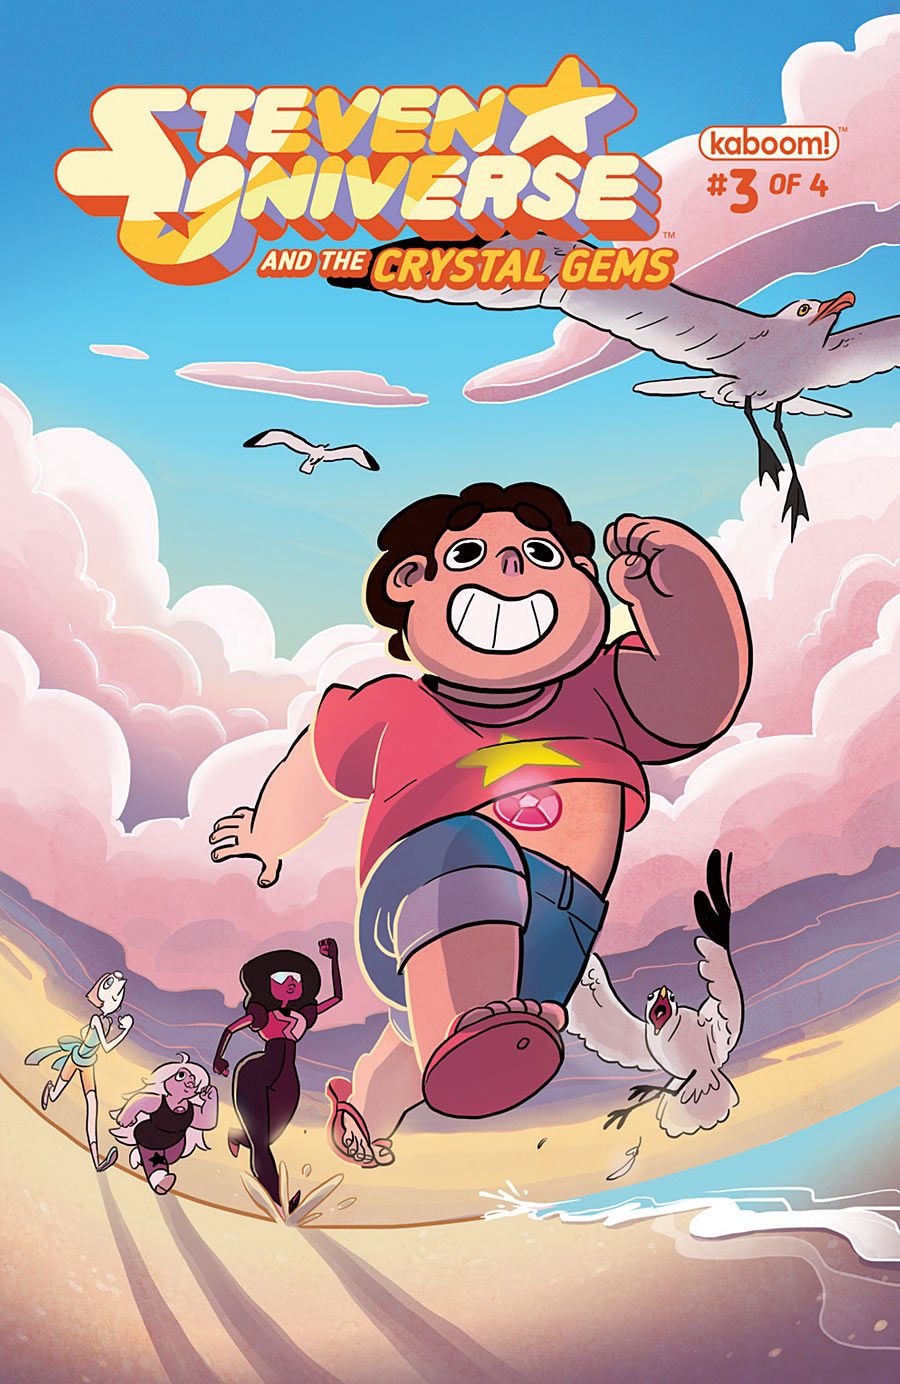 Steven Universe and the Crystal Gems #3 Comic